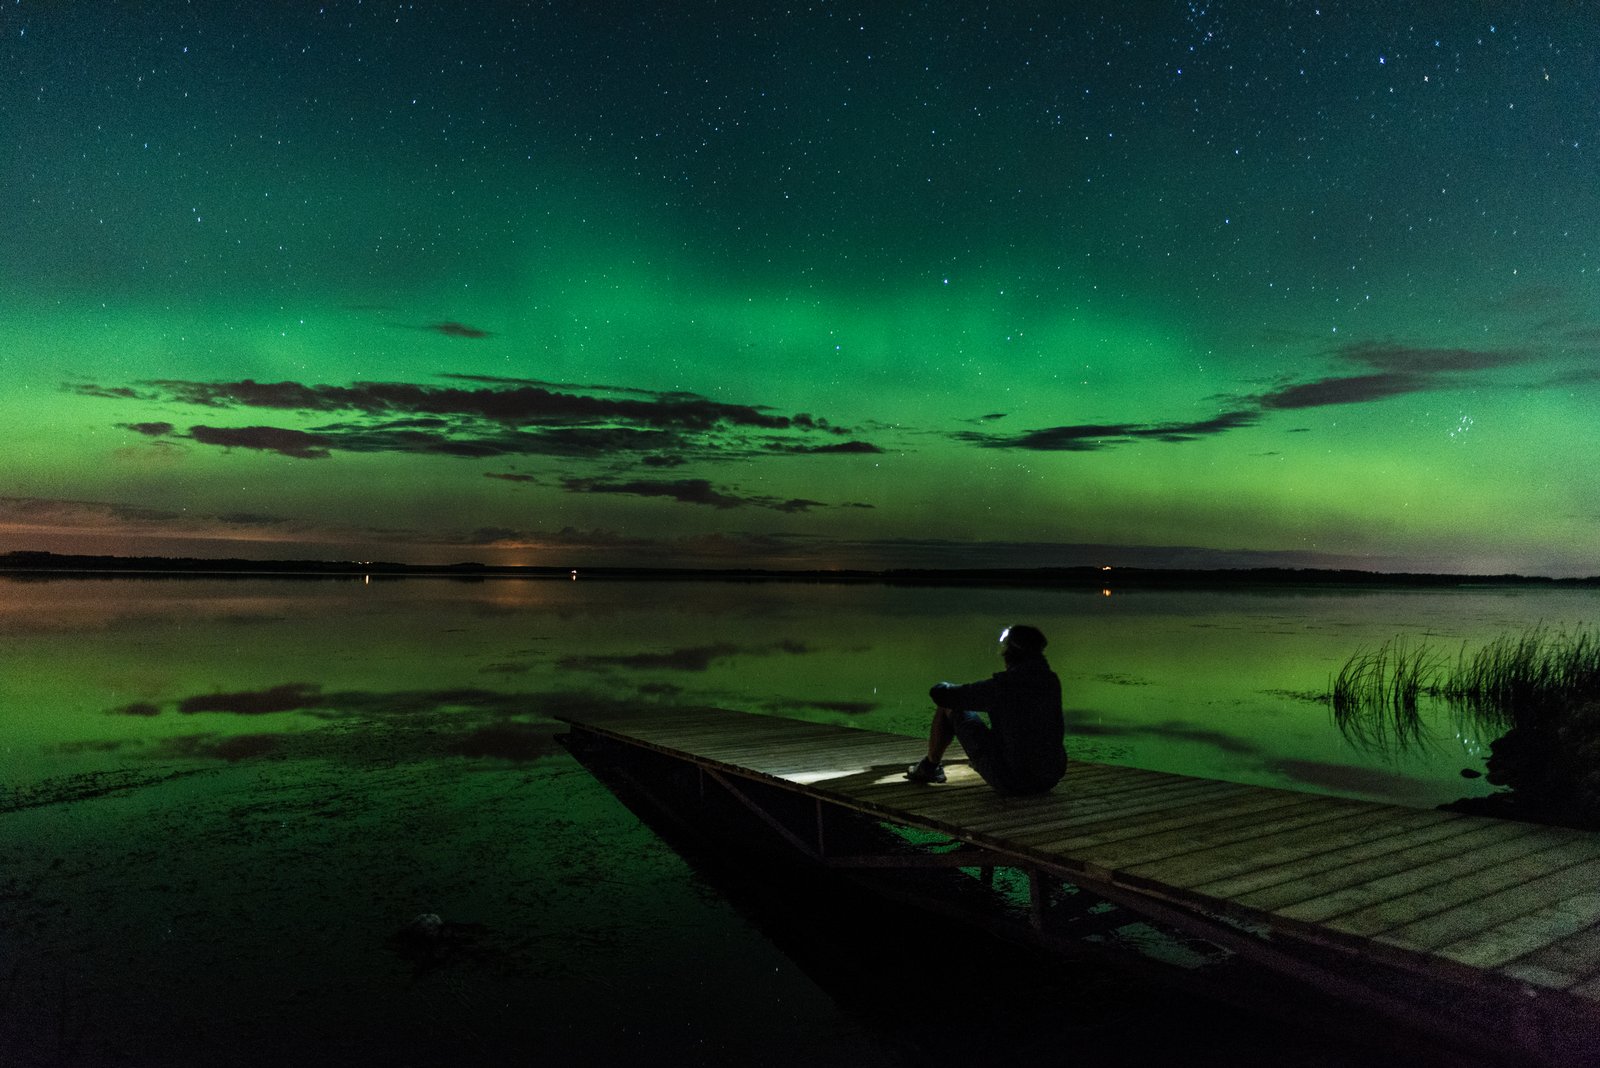 A person sitting on a dock admiring the northern light sky in Grande Prairie.